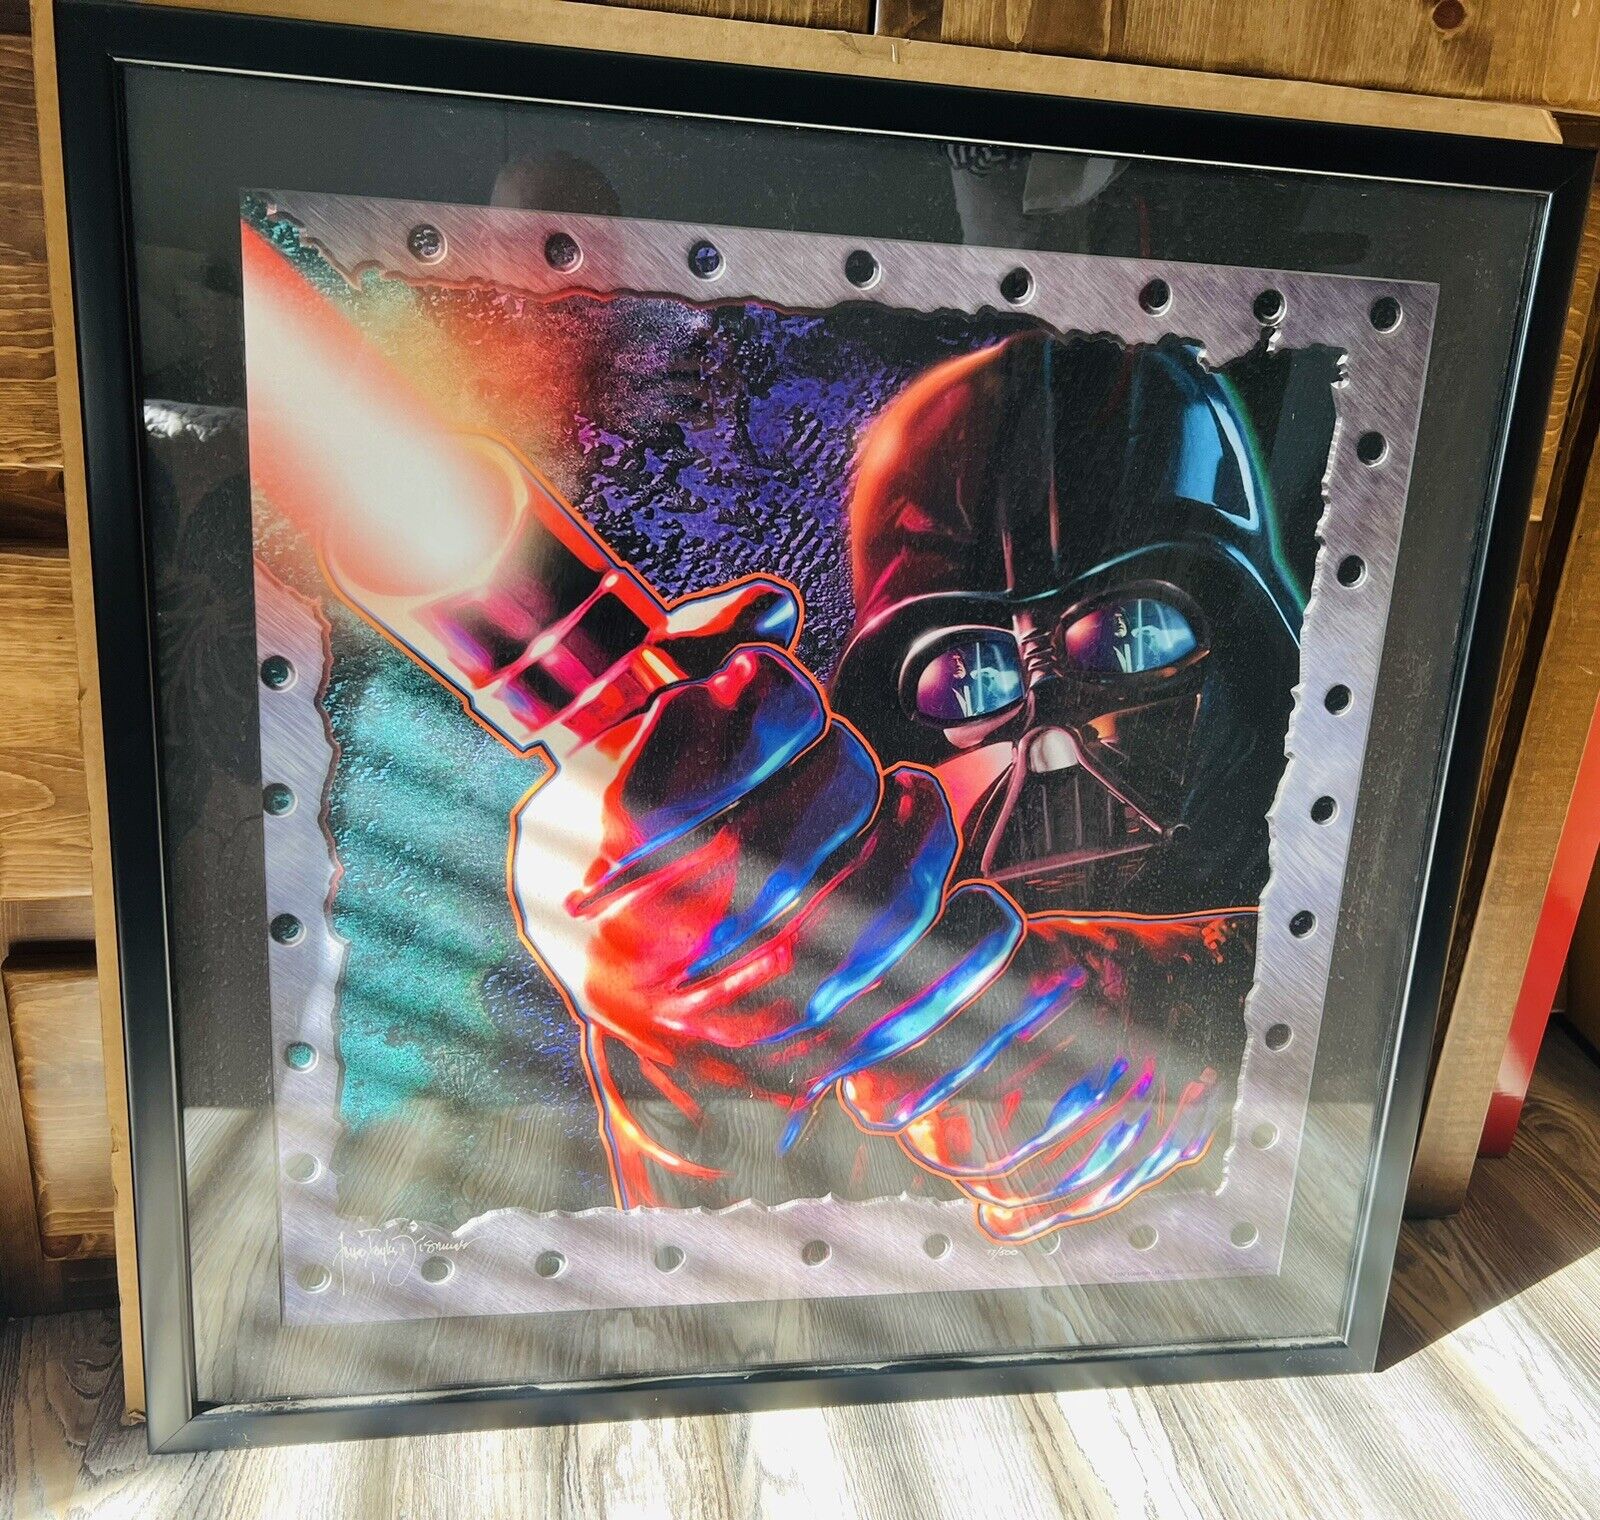 Framed Rare Collectible Limited Star Wars Darth Vader print  signed  500 Copies